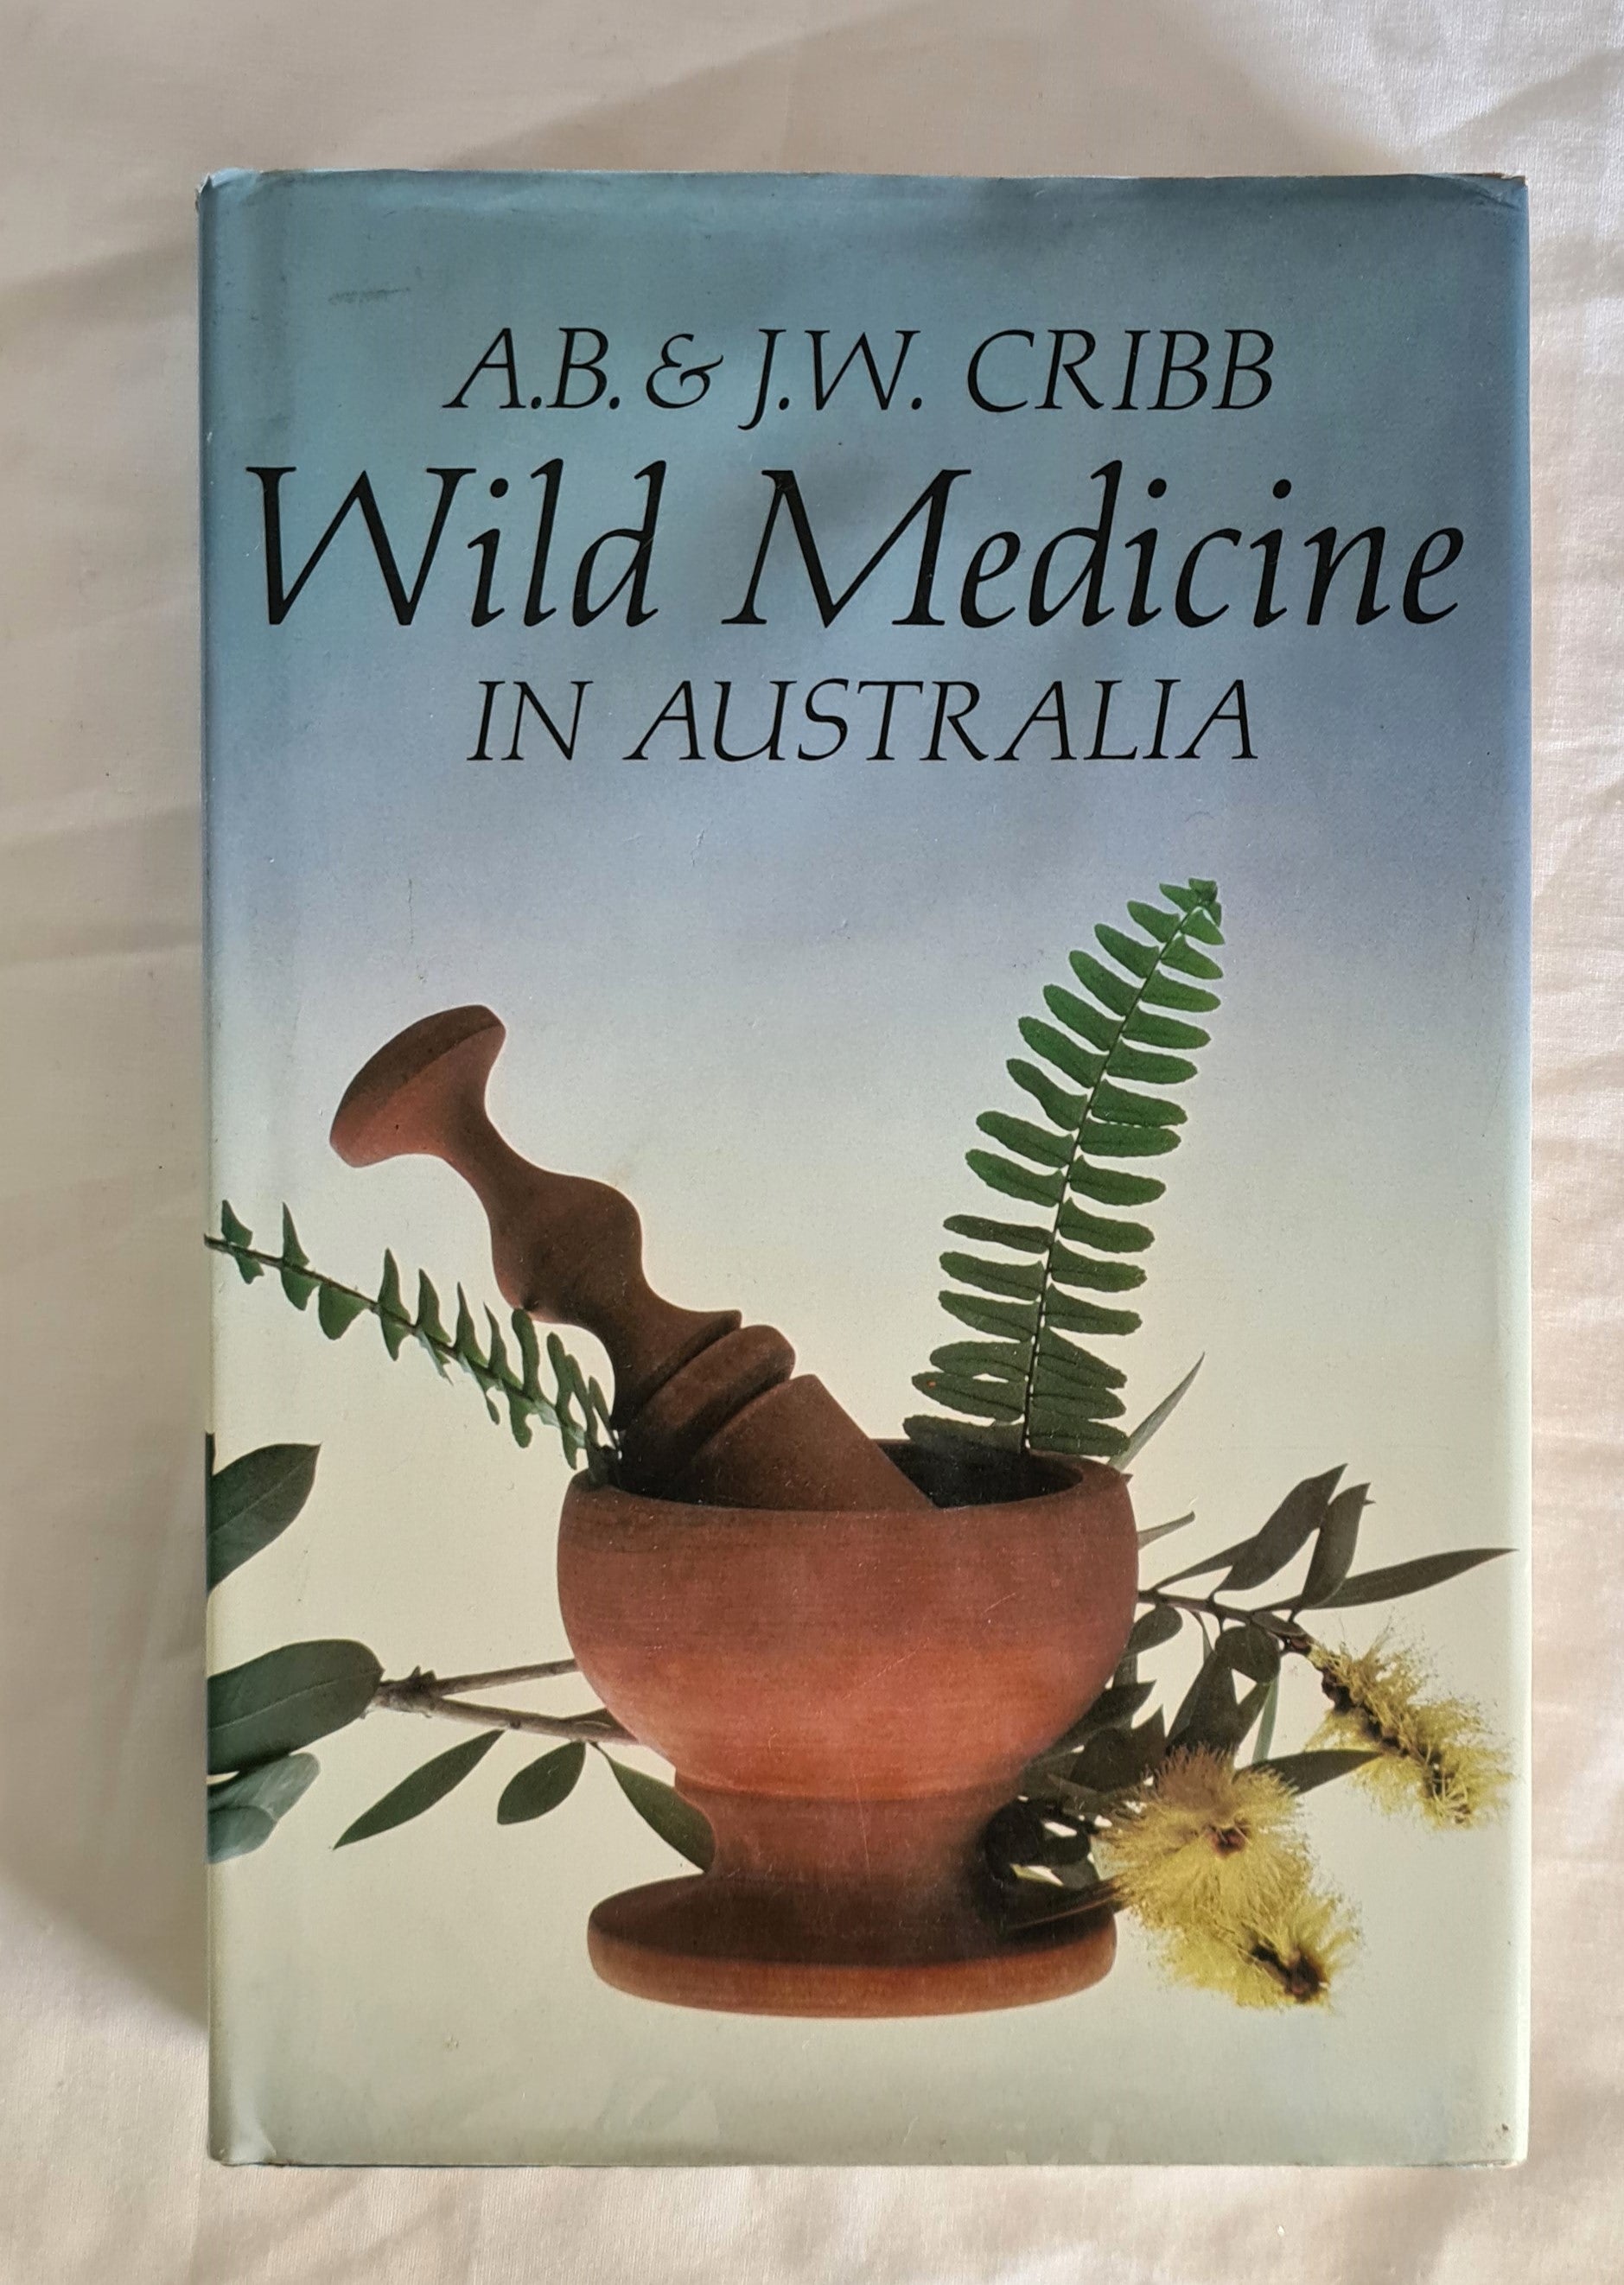 Wild Medicine in Australia  by A. B. & J. W. Cribb  Paintings by Charles McCubbin